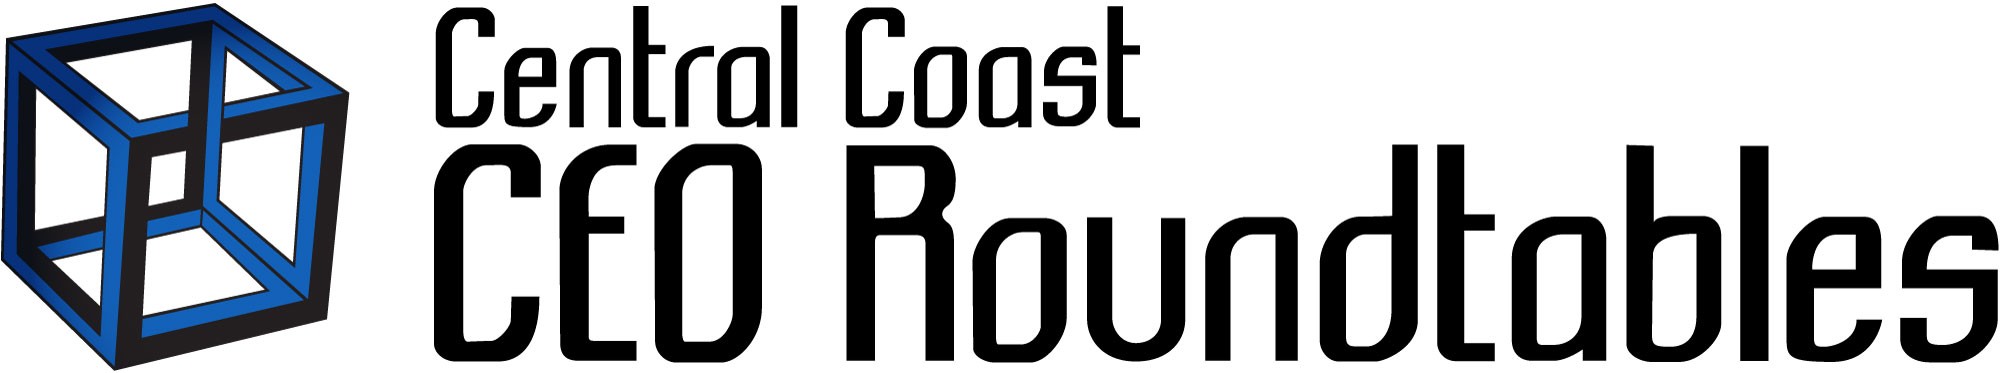 Central Coast CEO Roundtables